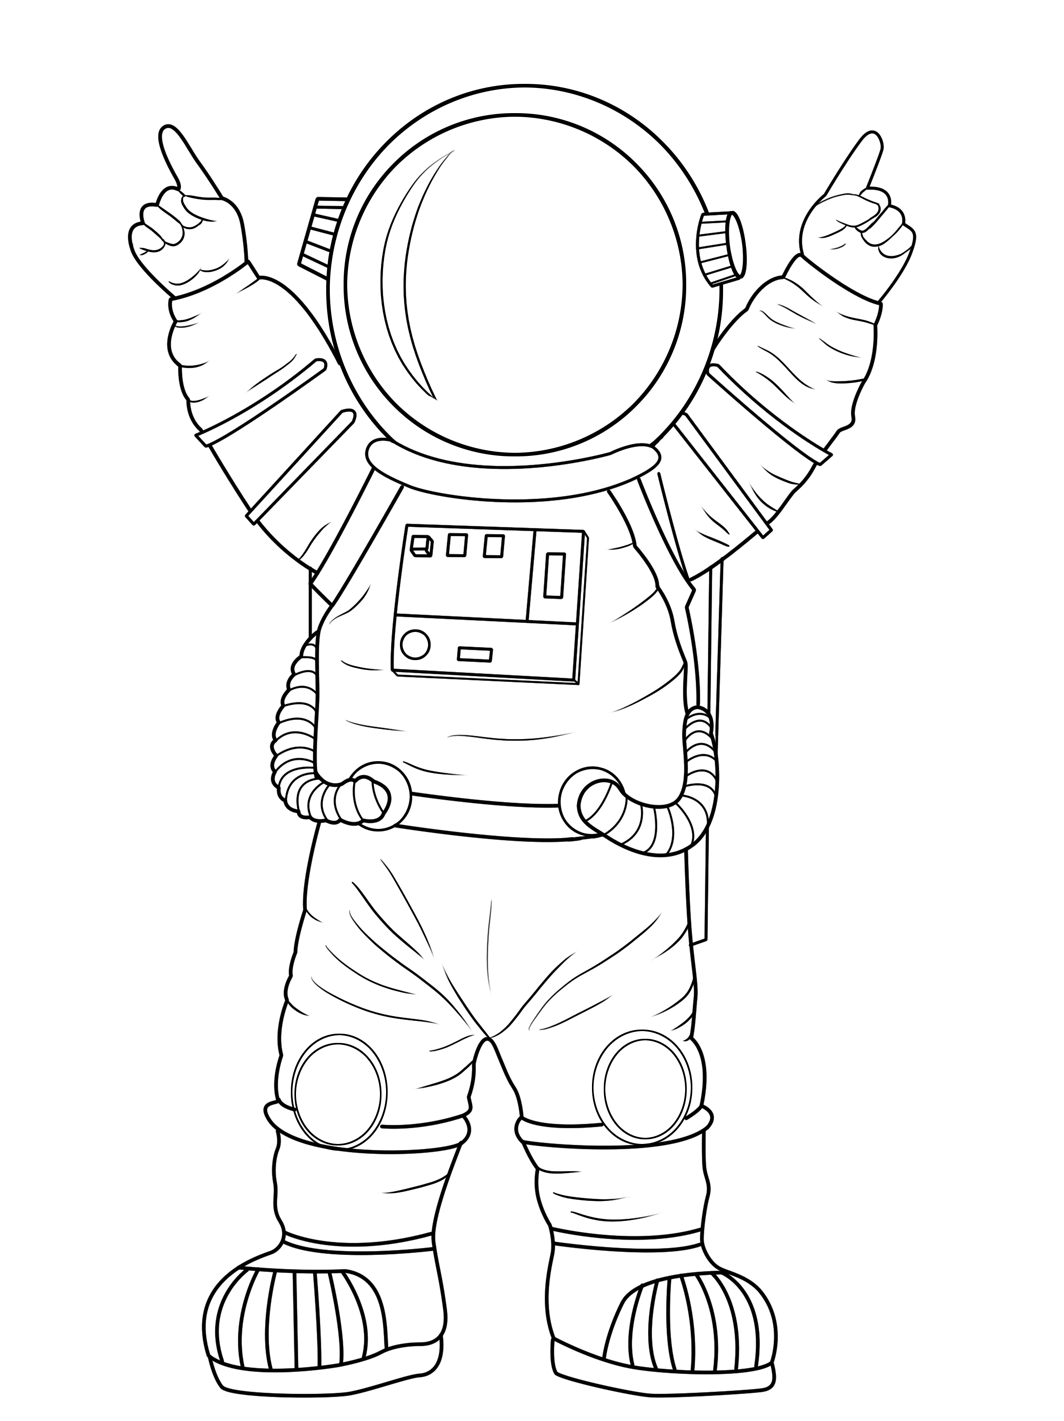 Astronaut Yeah Coloring Pages   Astronaut Coloring Pages ...